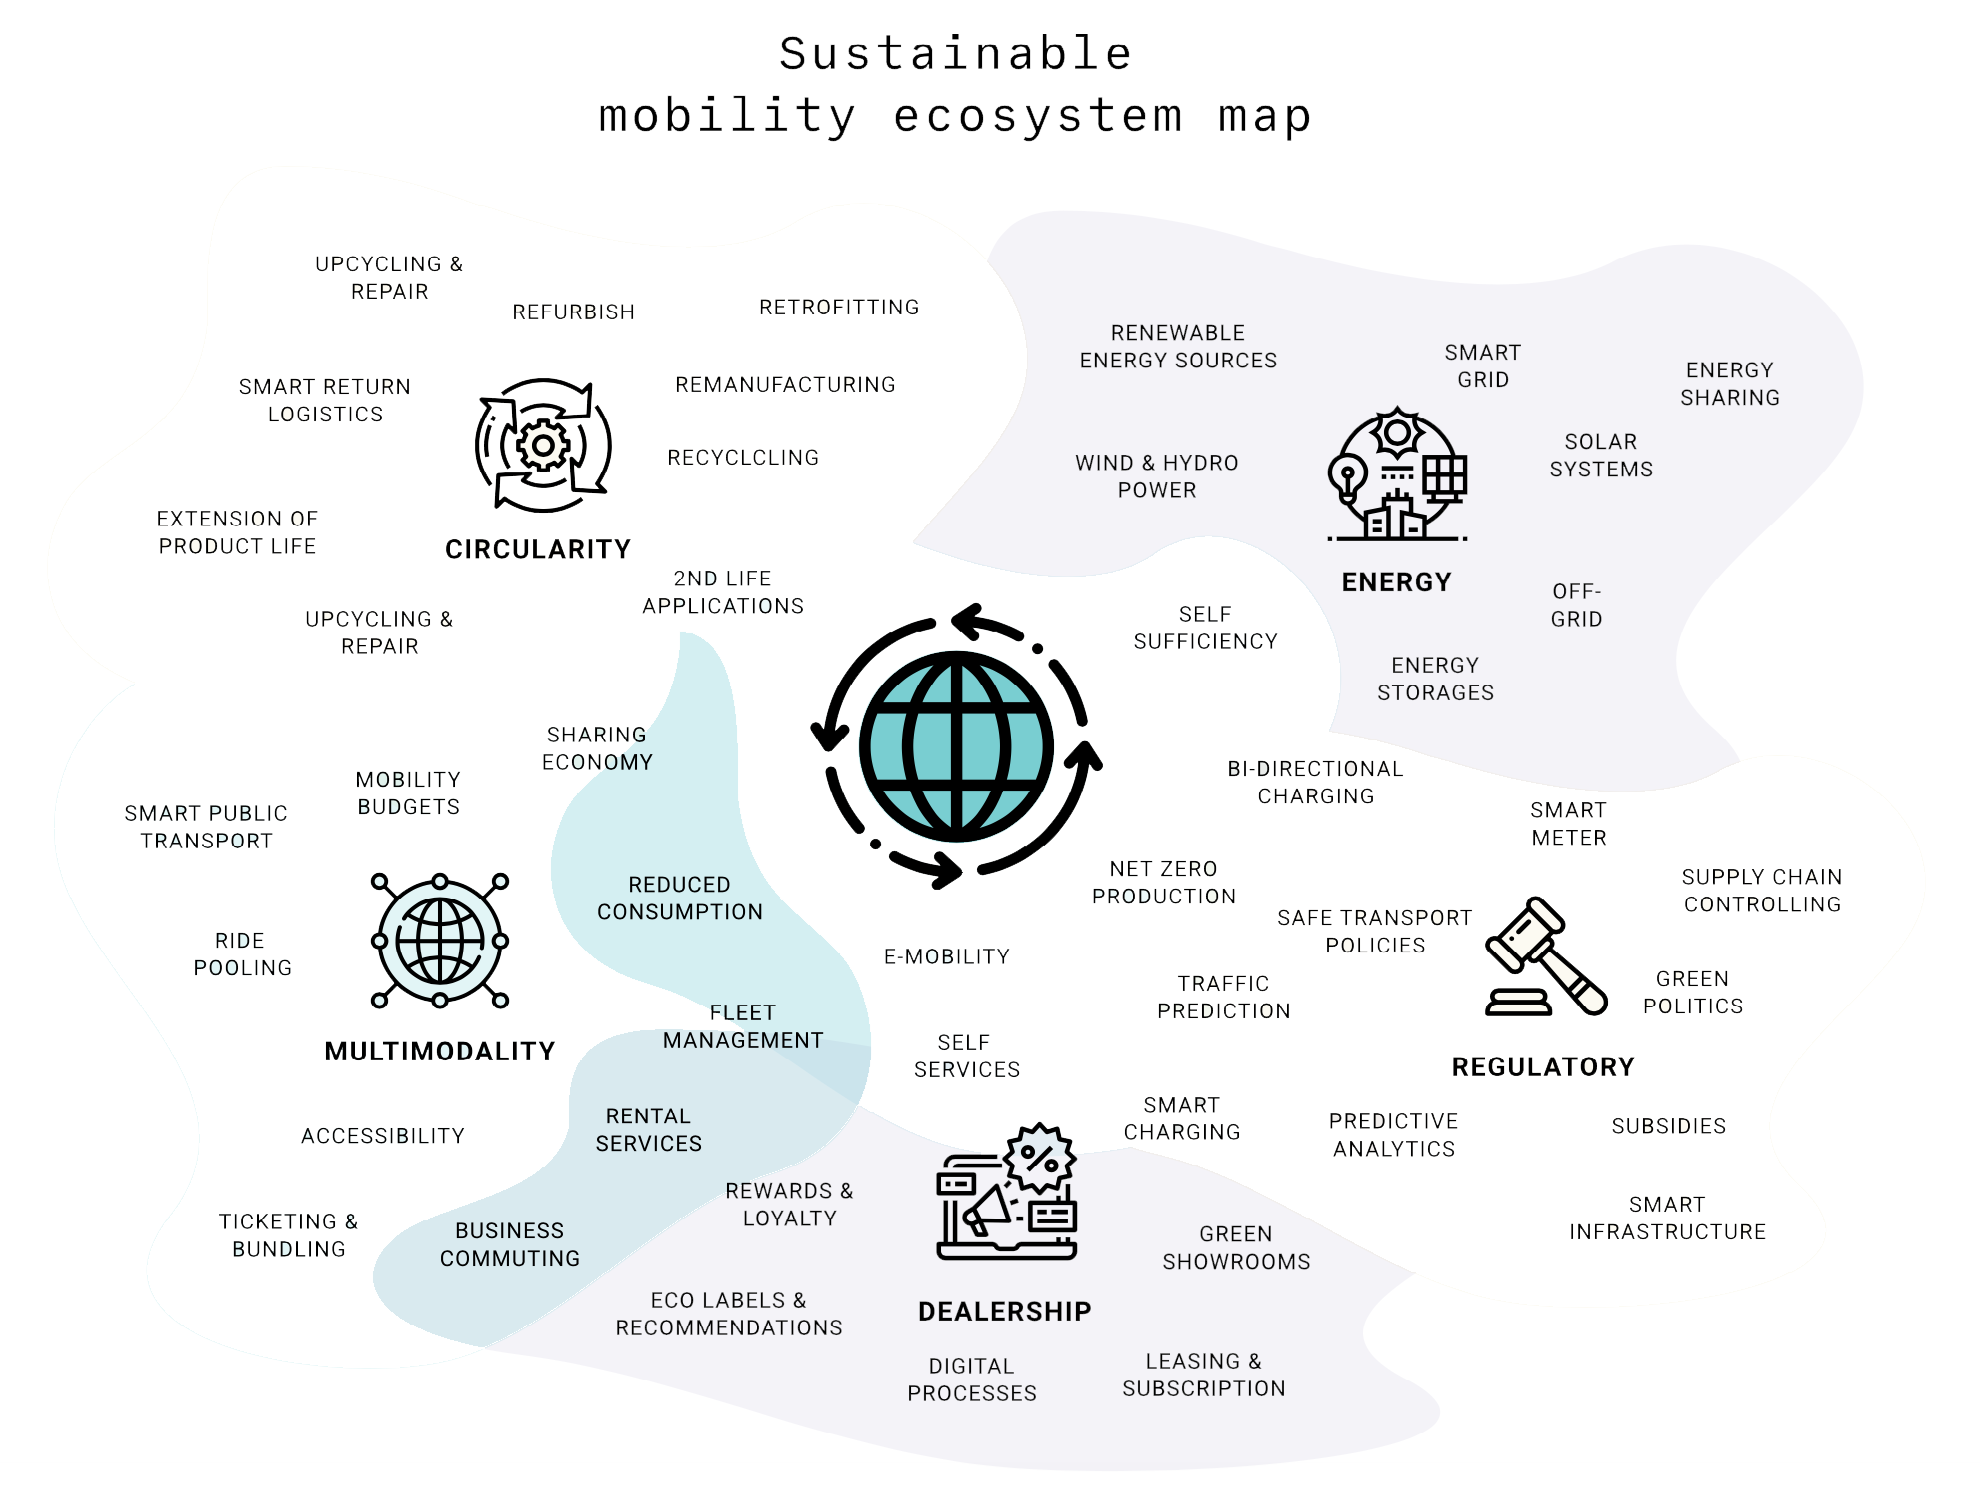 Sustainable mobility ecosystem map